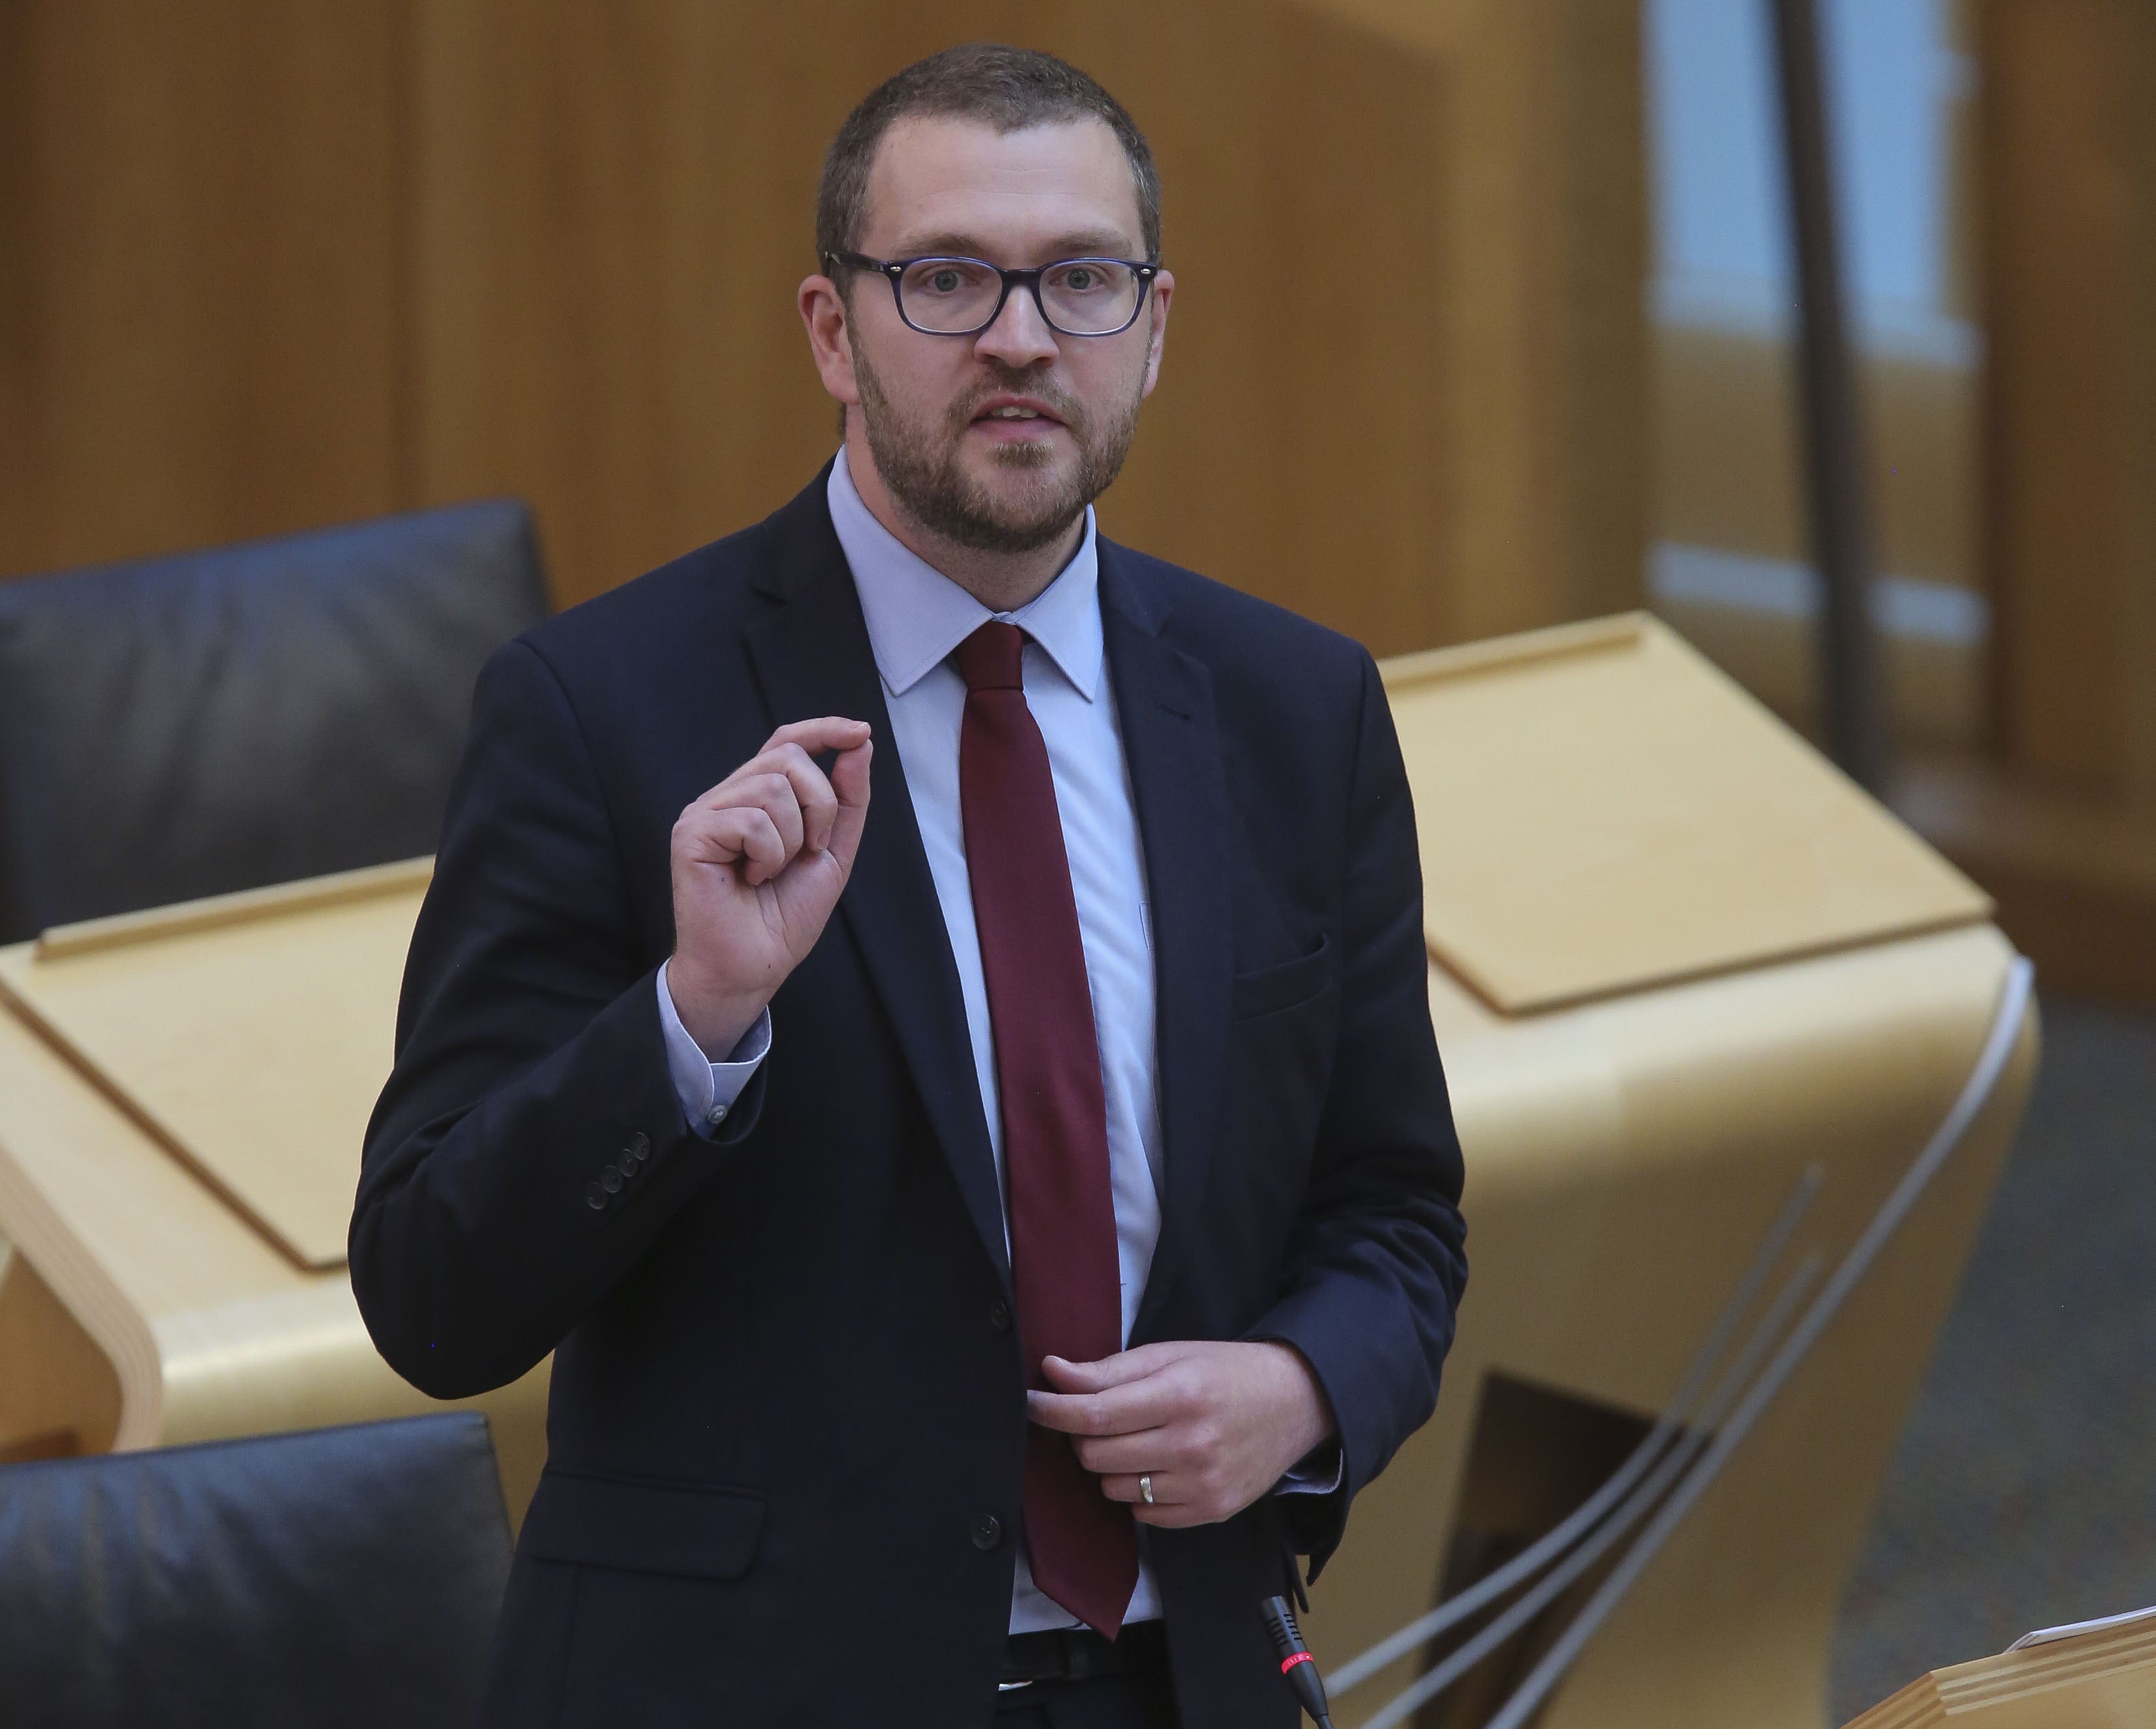 Oliver Mundell spoke ahead of a committee meeting at Holyrood (Fraser Bremner/Scottish Daily Mail/PA)